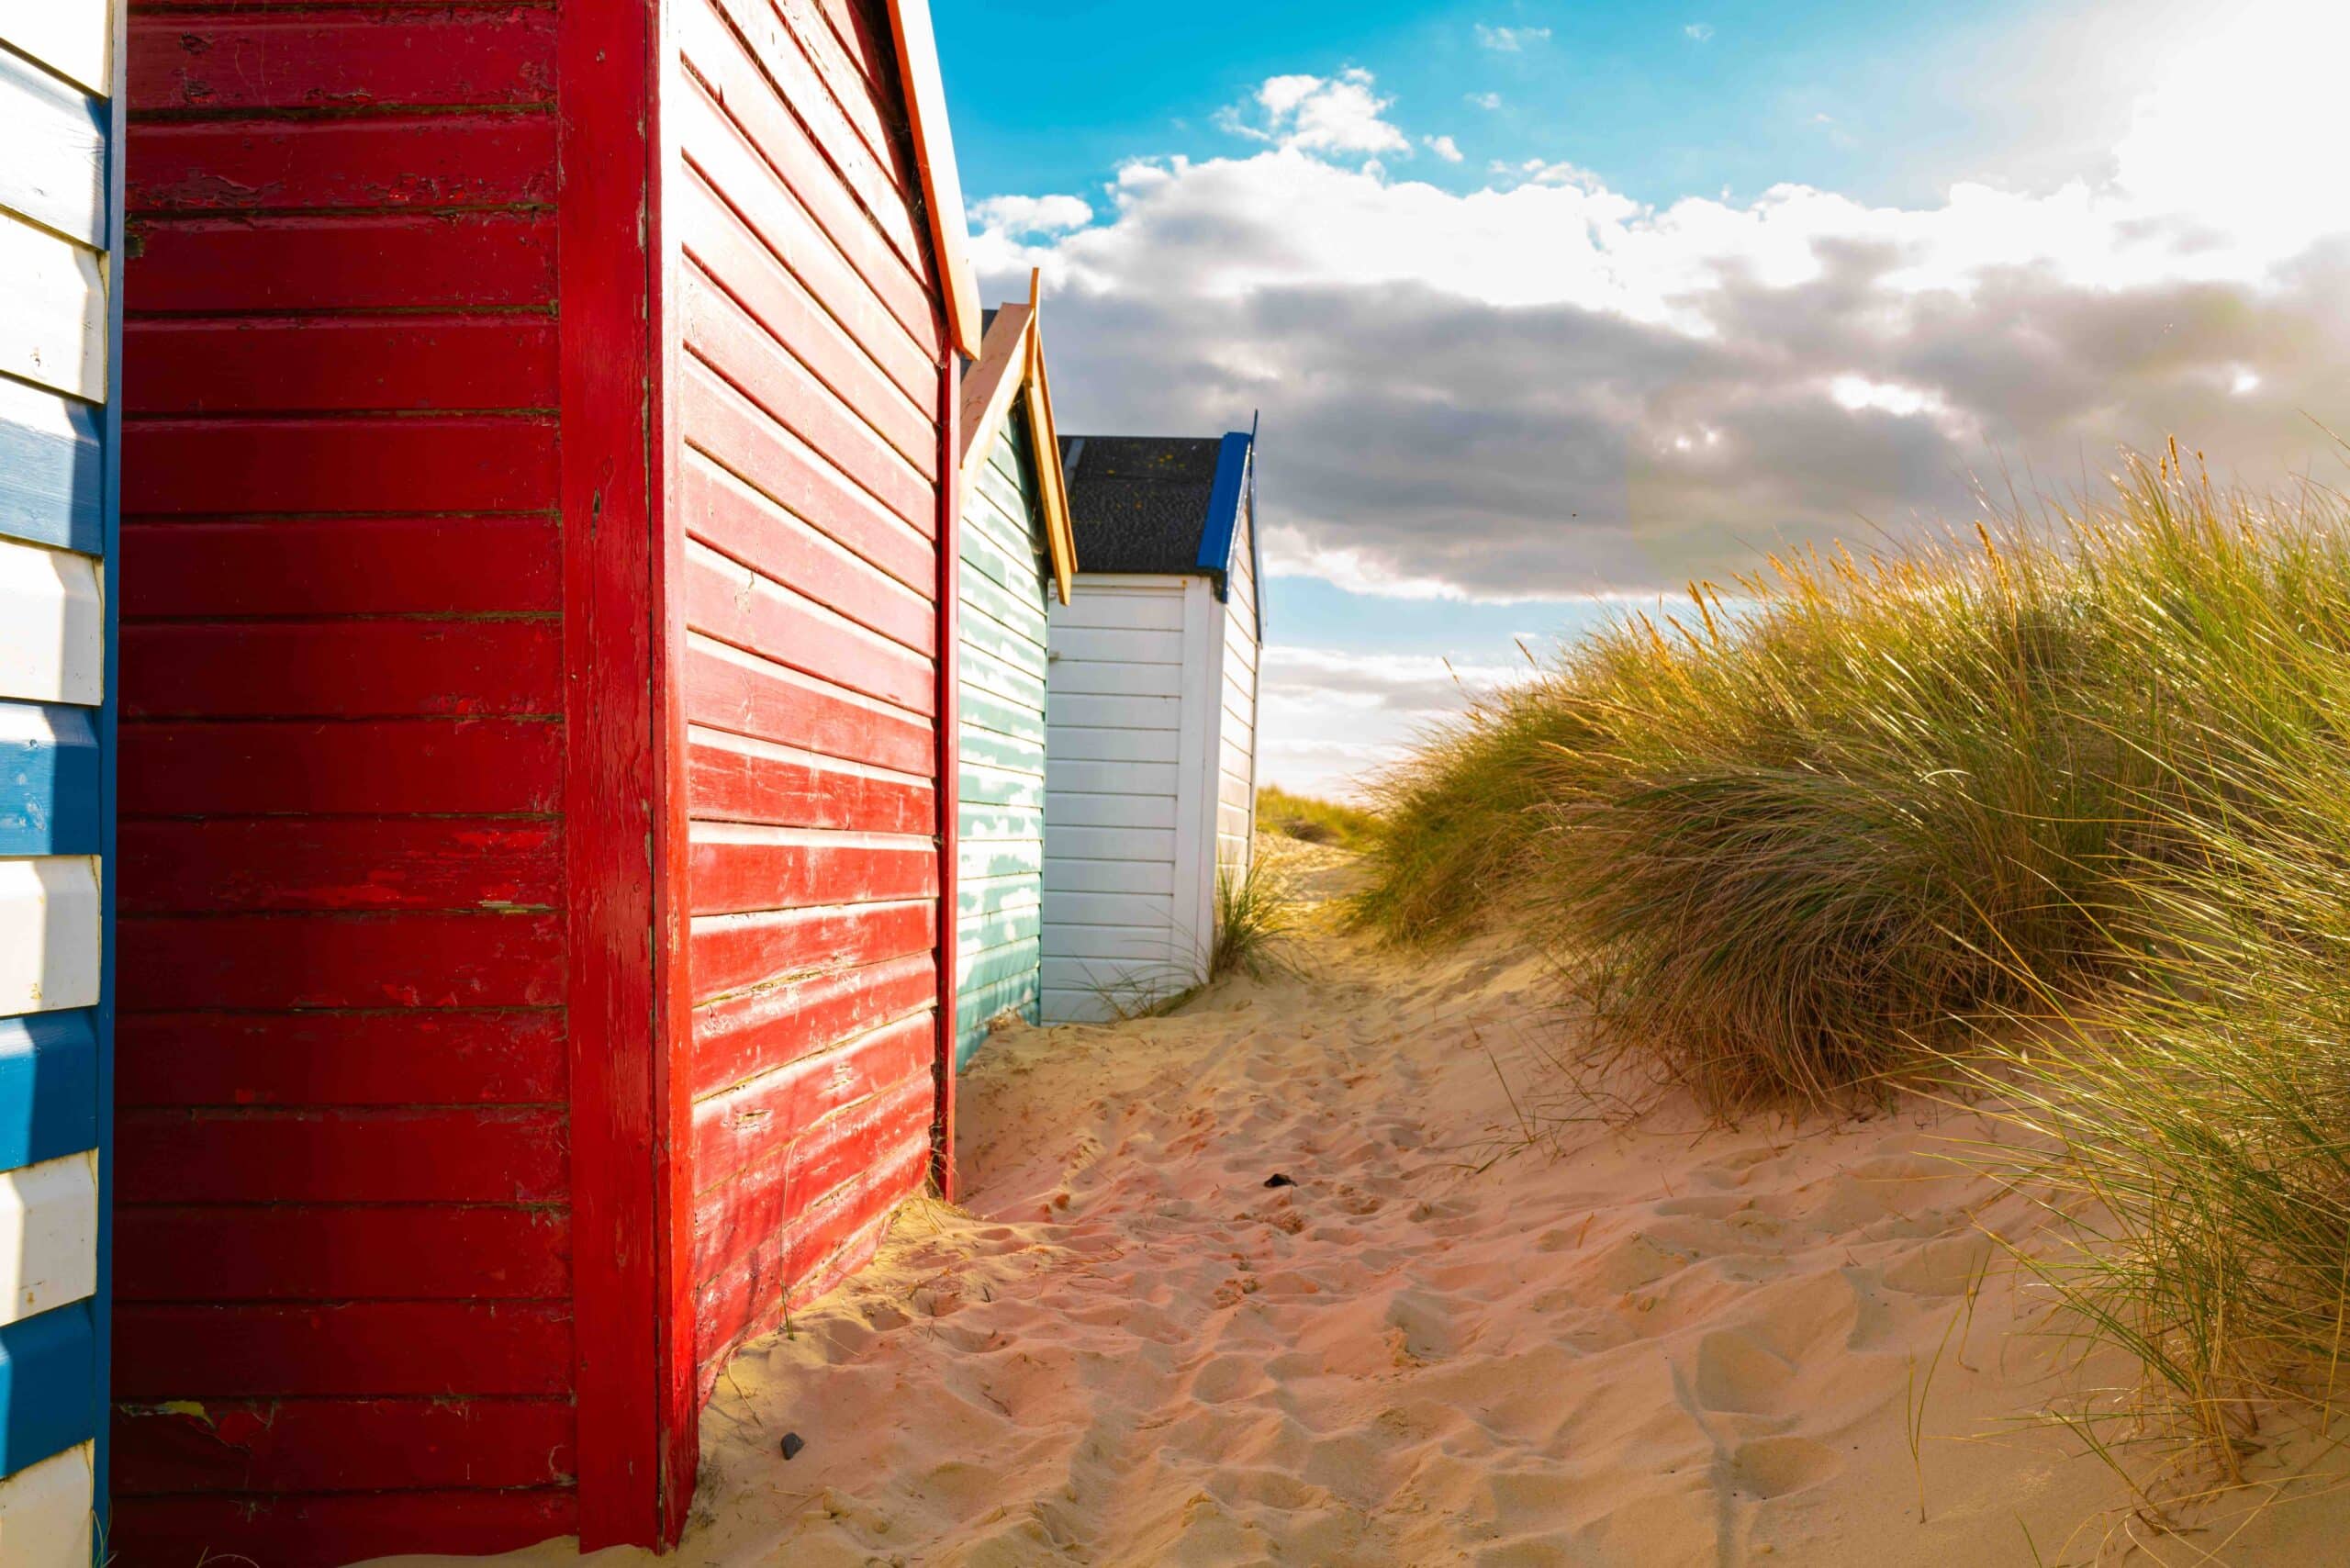 ow of brightly painted beach houses seen on golden sand by sand dunes. Located on the Suffolk coast in the UK.